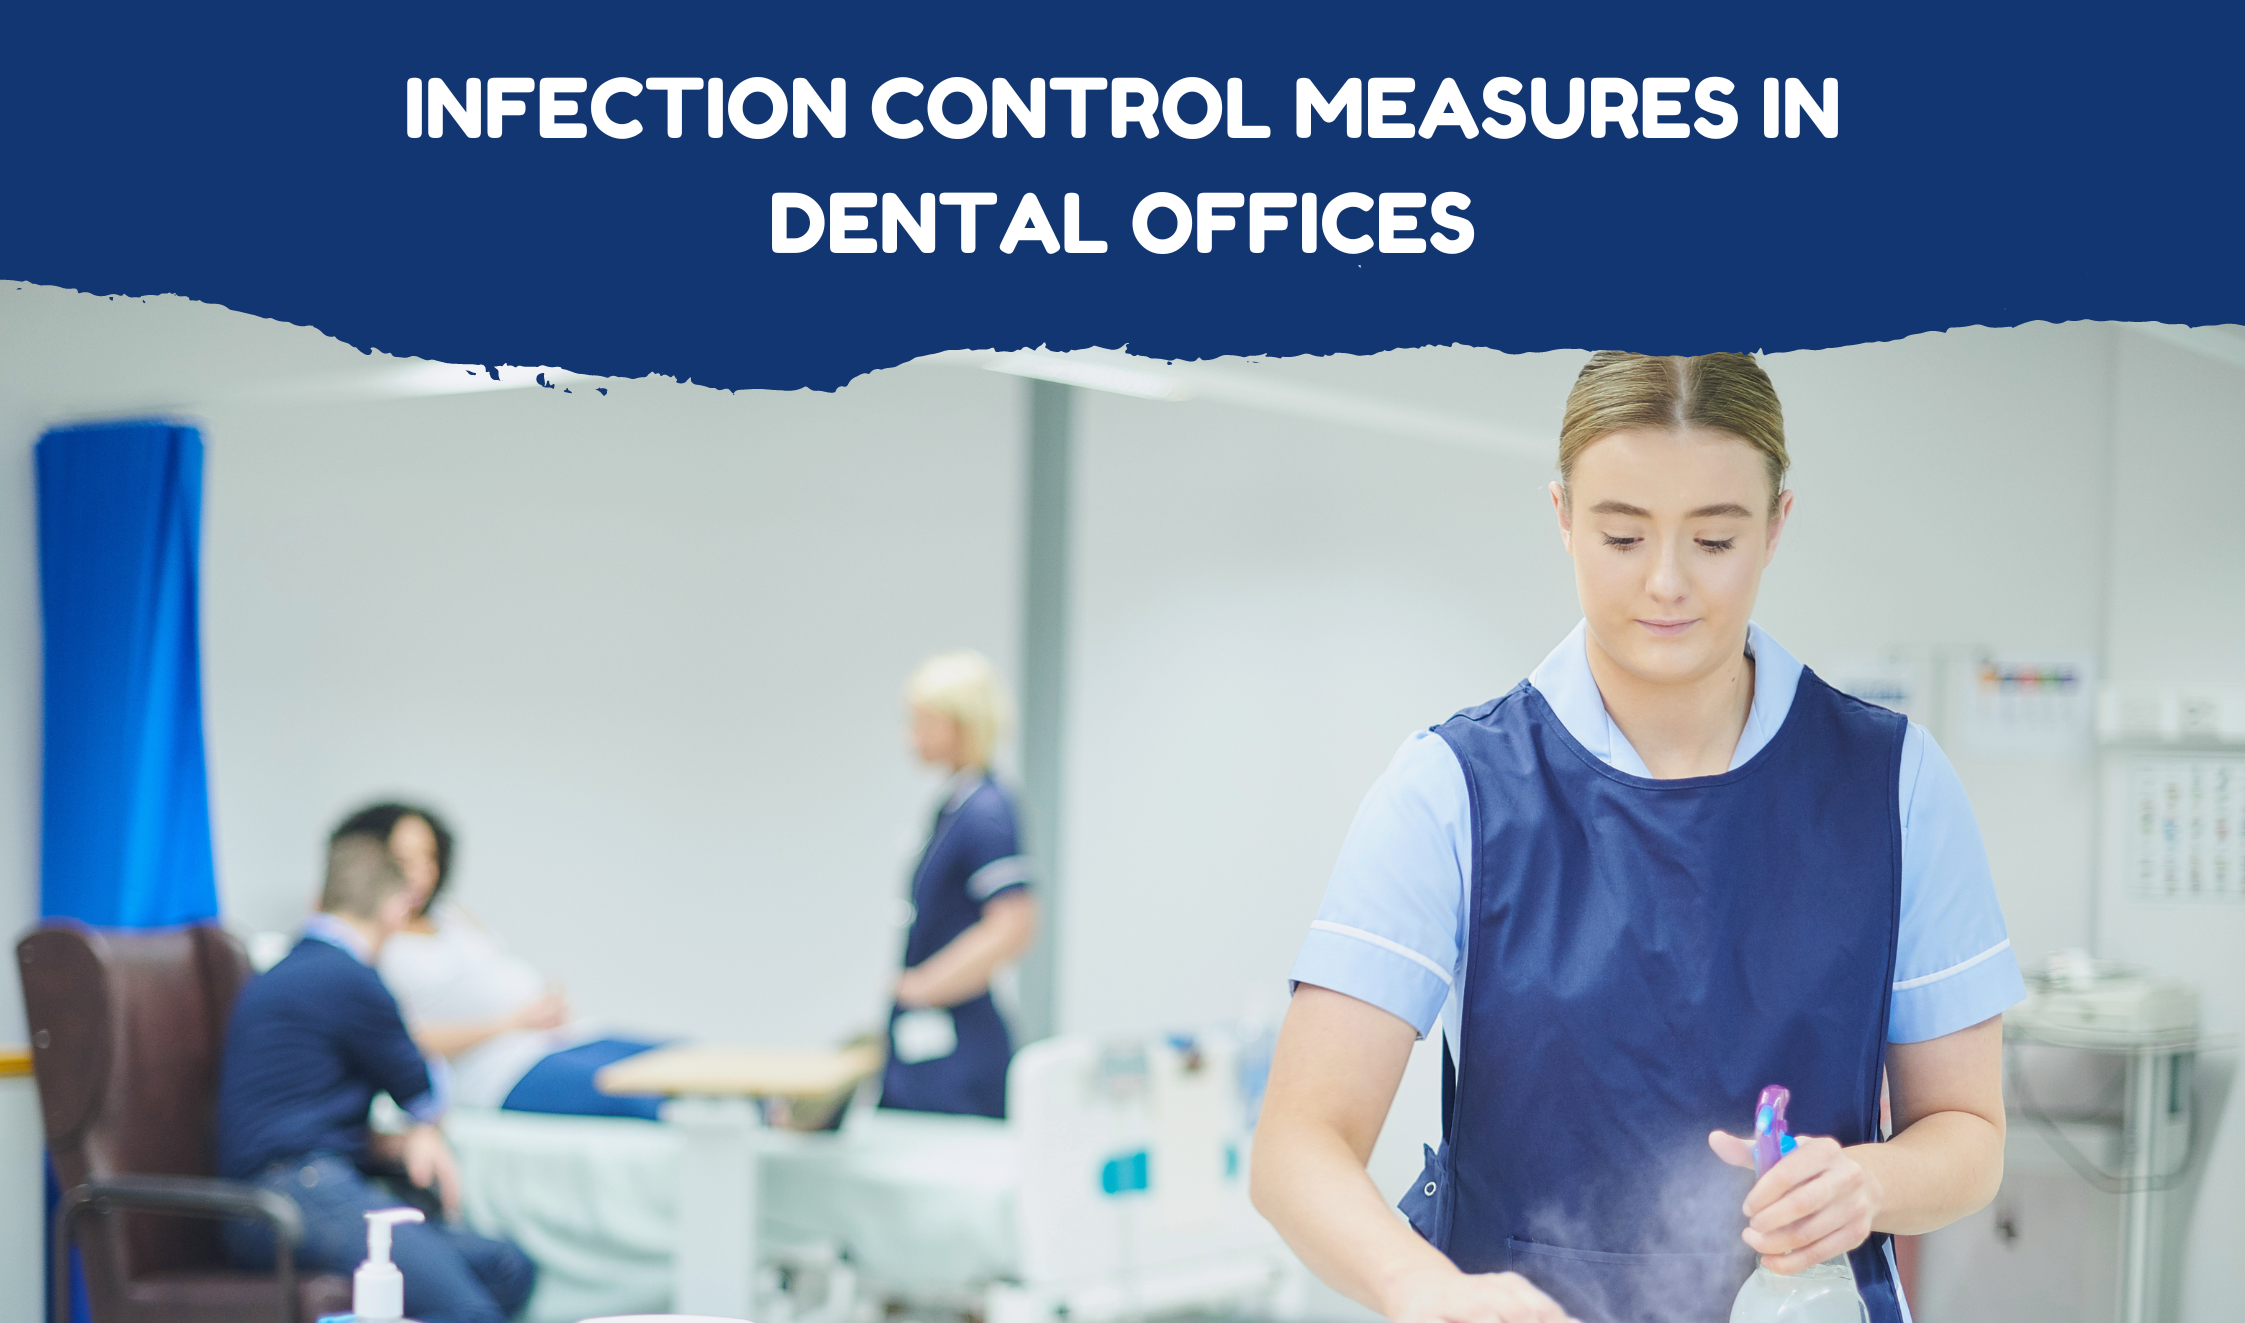 Infection control measures in dental offices